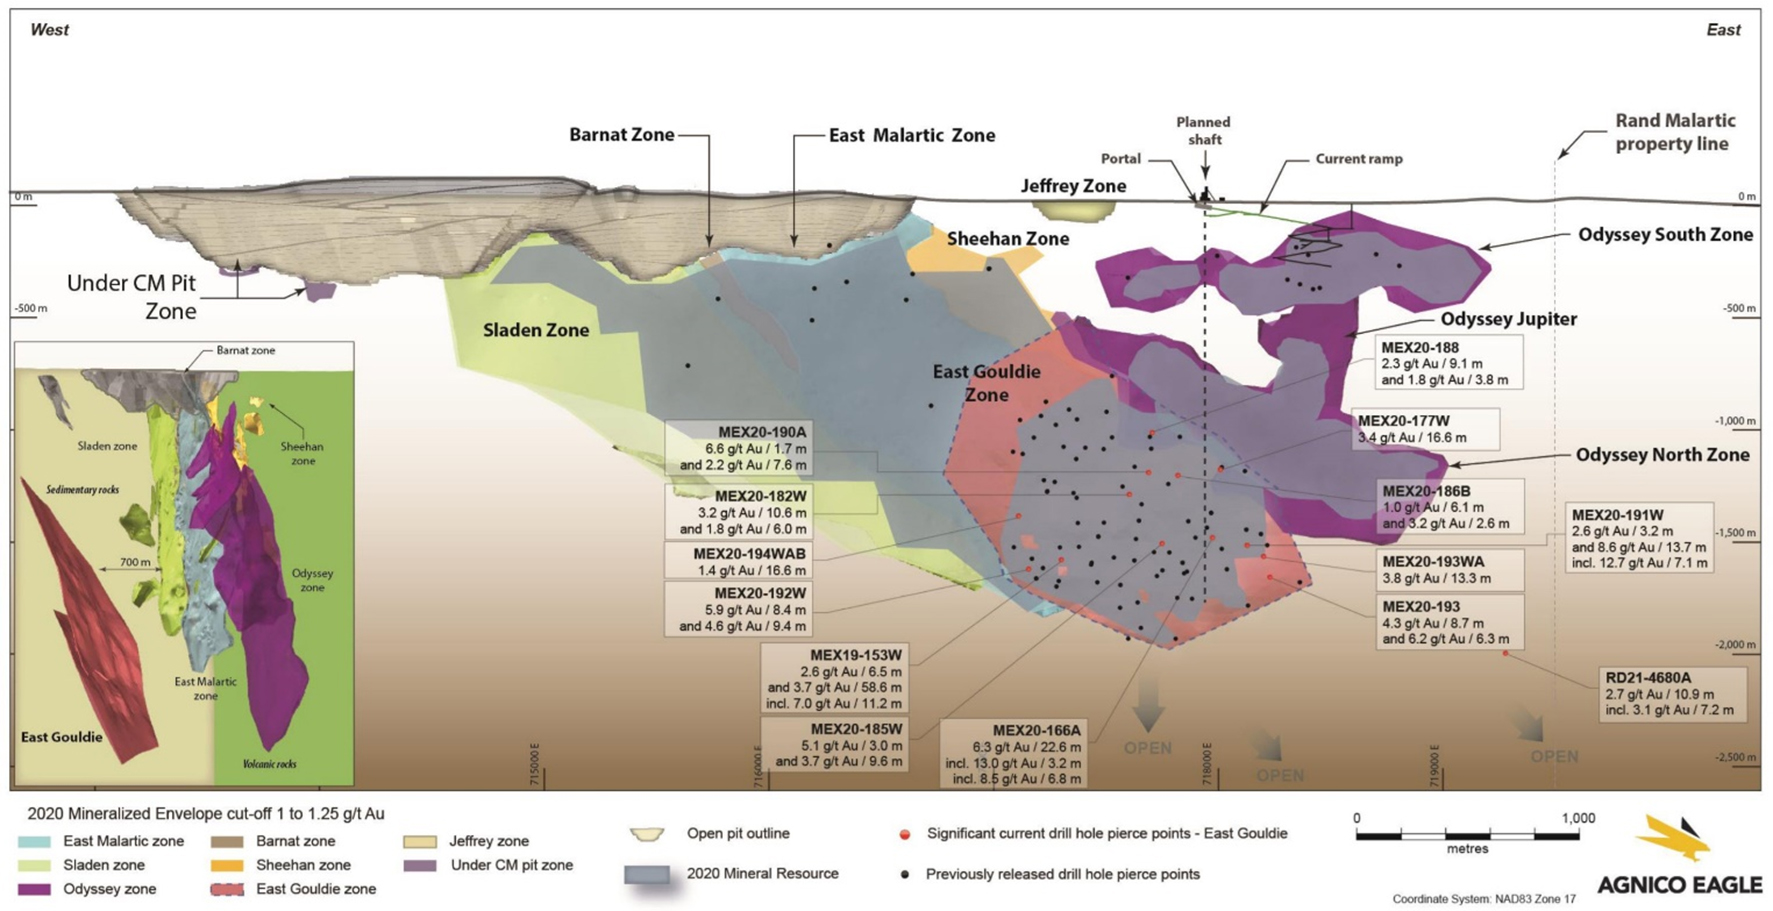 Figure 1: Composites long section from Agnico Eagle’s April 29, 2021 press release showing exploration highlights on the East Gouldie deposit.